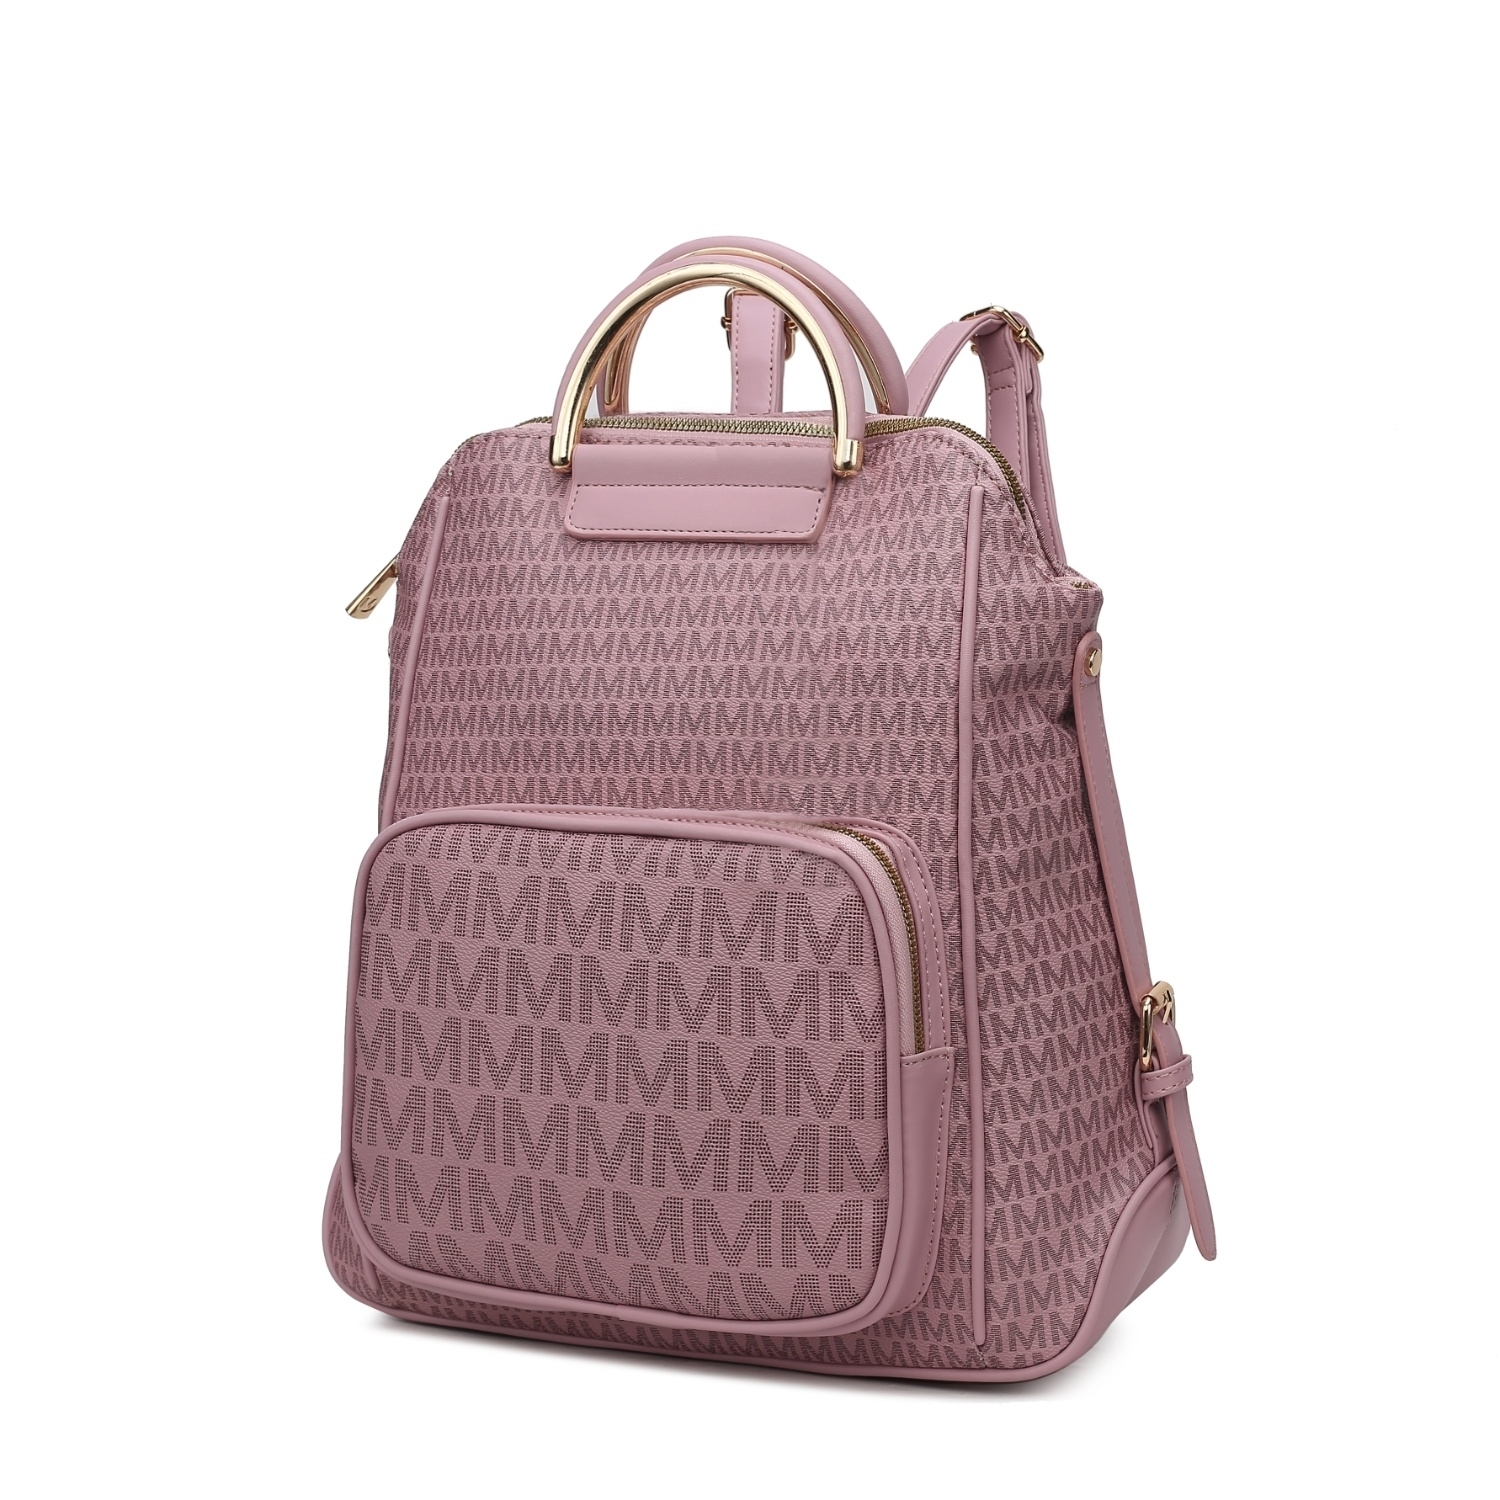 MKF Collection June M Logo Printed Vegan Leather Women's Backpack By Mia K - Lavender